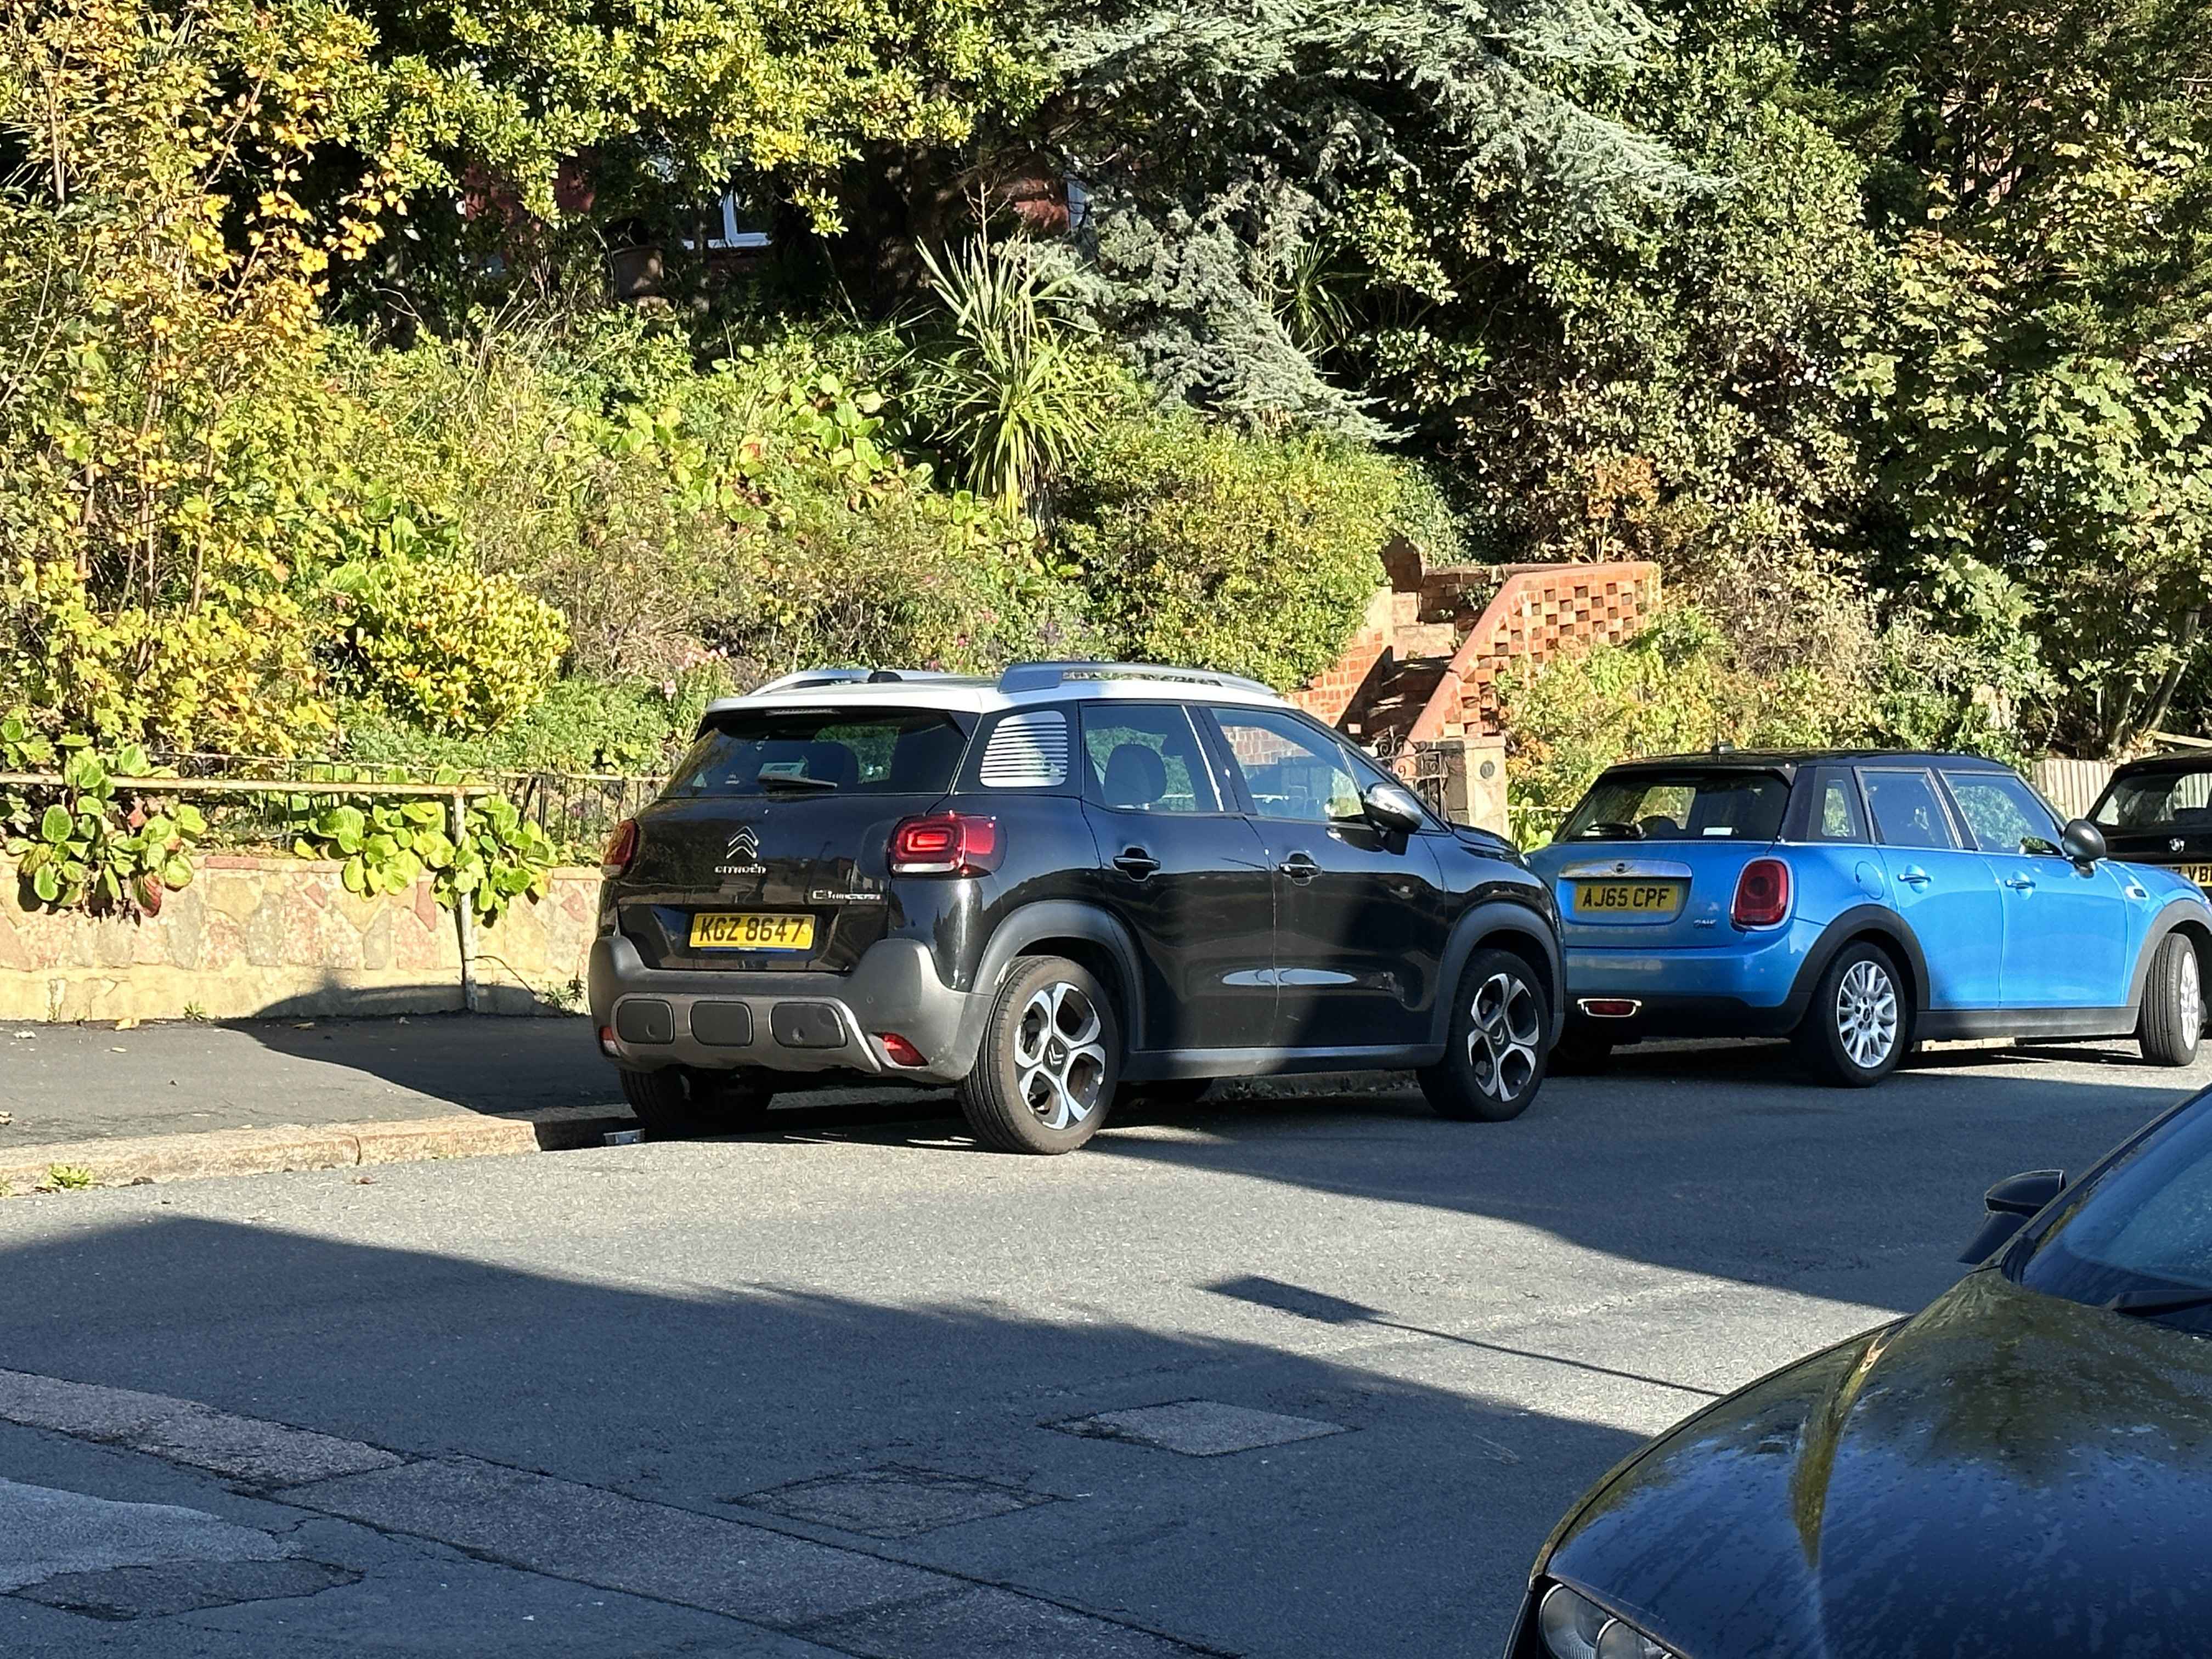 Photograph of KGZ 8647 - a Black Citroen C3 parked in Hollingdean by a non-resident who uses the local area as part of their Brighton commute. The fifth of five photographs supplied by the residents of Hollingdean.